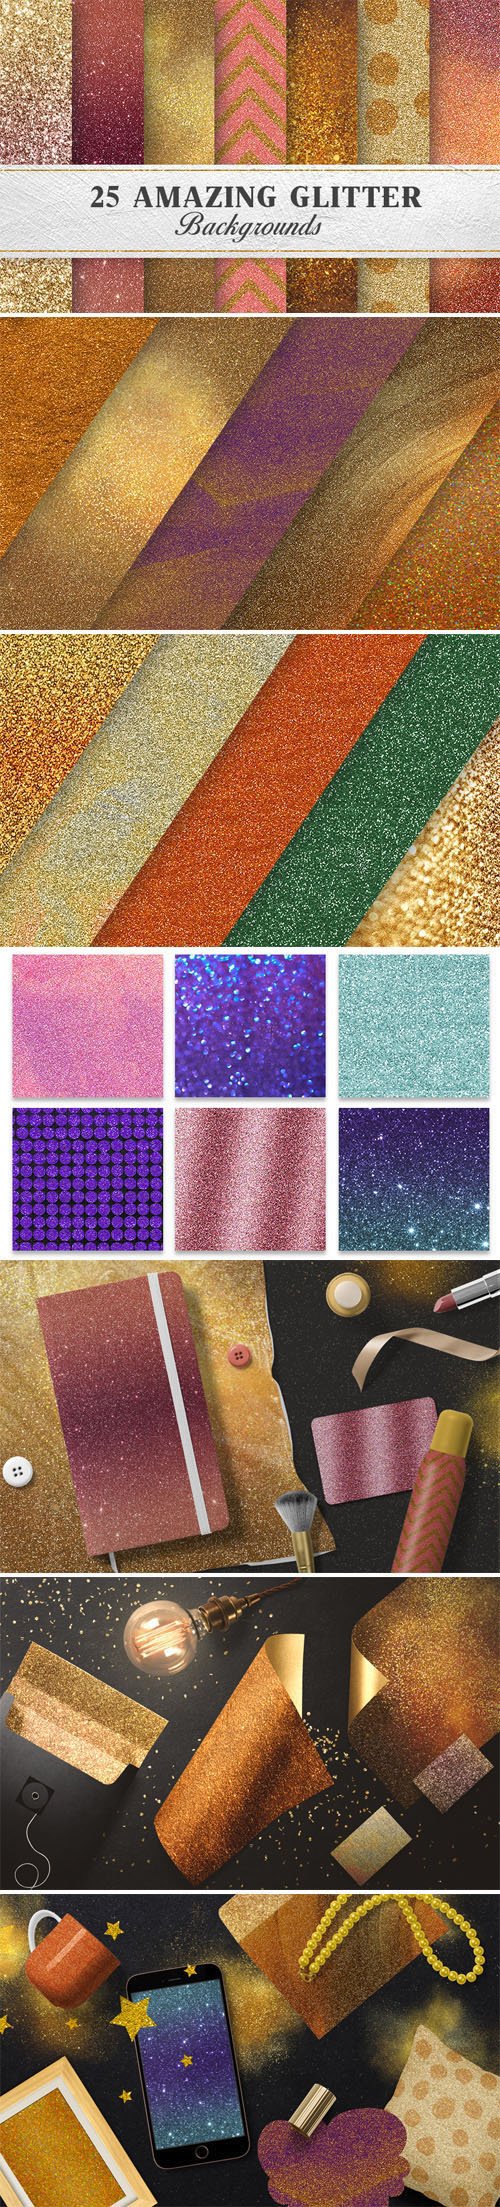 25 Amazing Glitter Backgrounds Collection